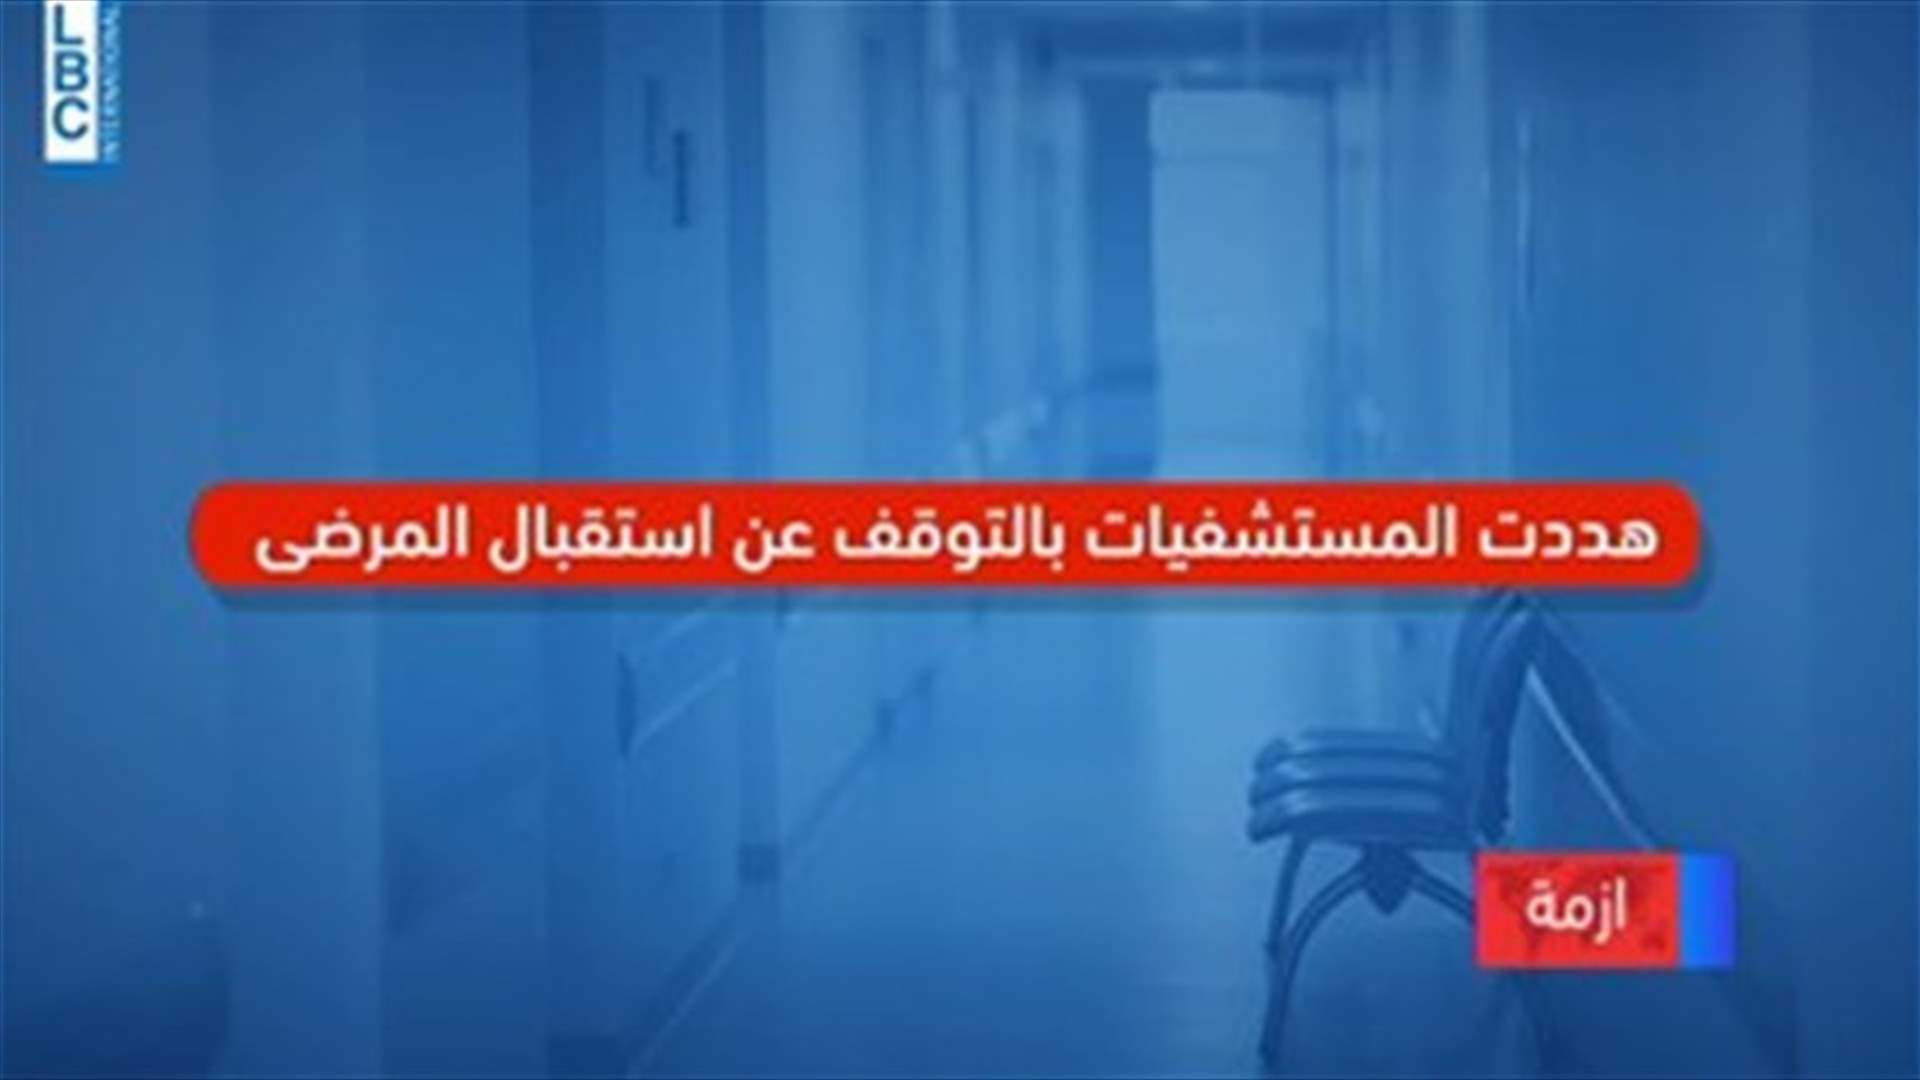 Lebanon’s hospitals at risk of canceling surgeries